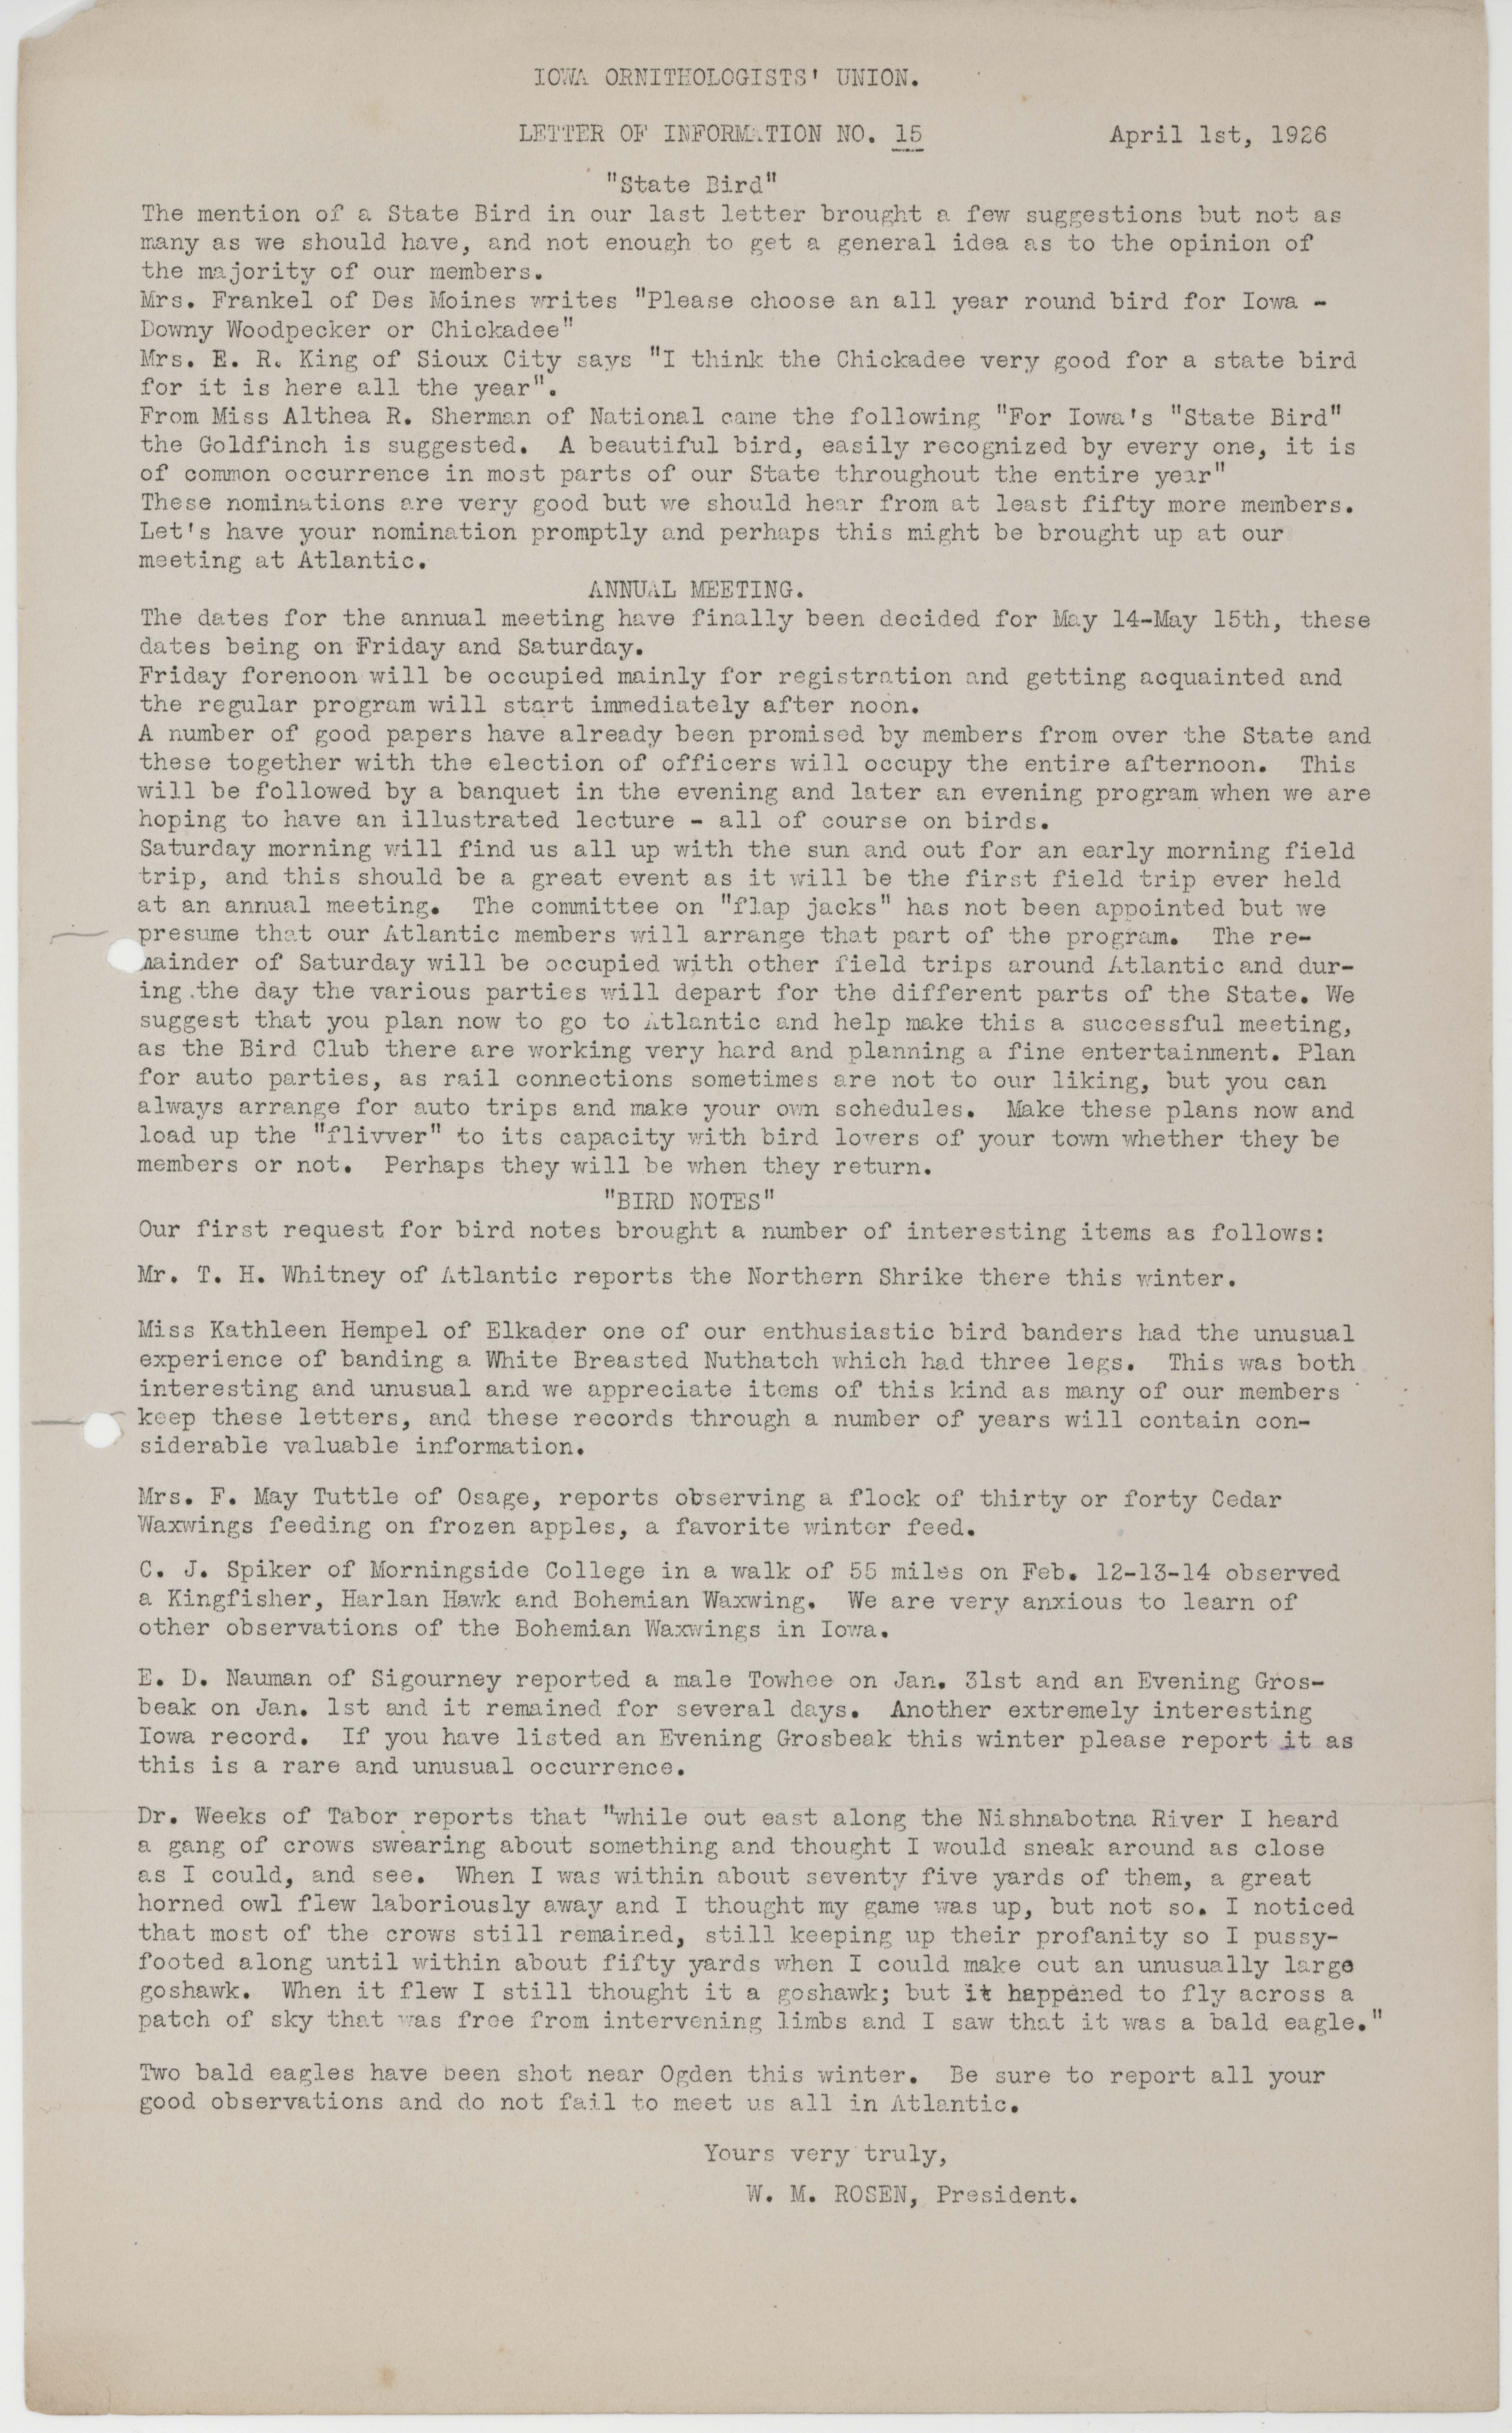 Letter to members of the Iowa Ornithologists' Union regarding annual meeting, April 1, 1926